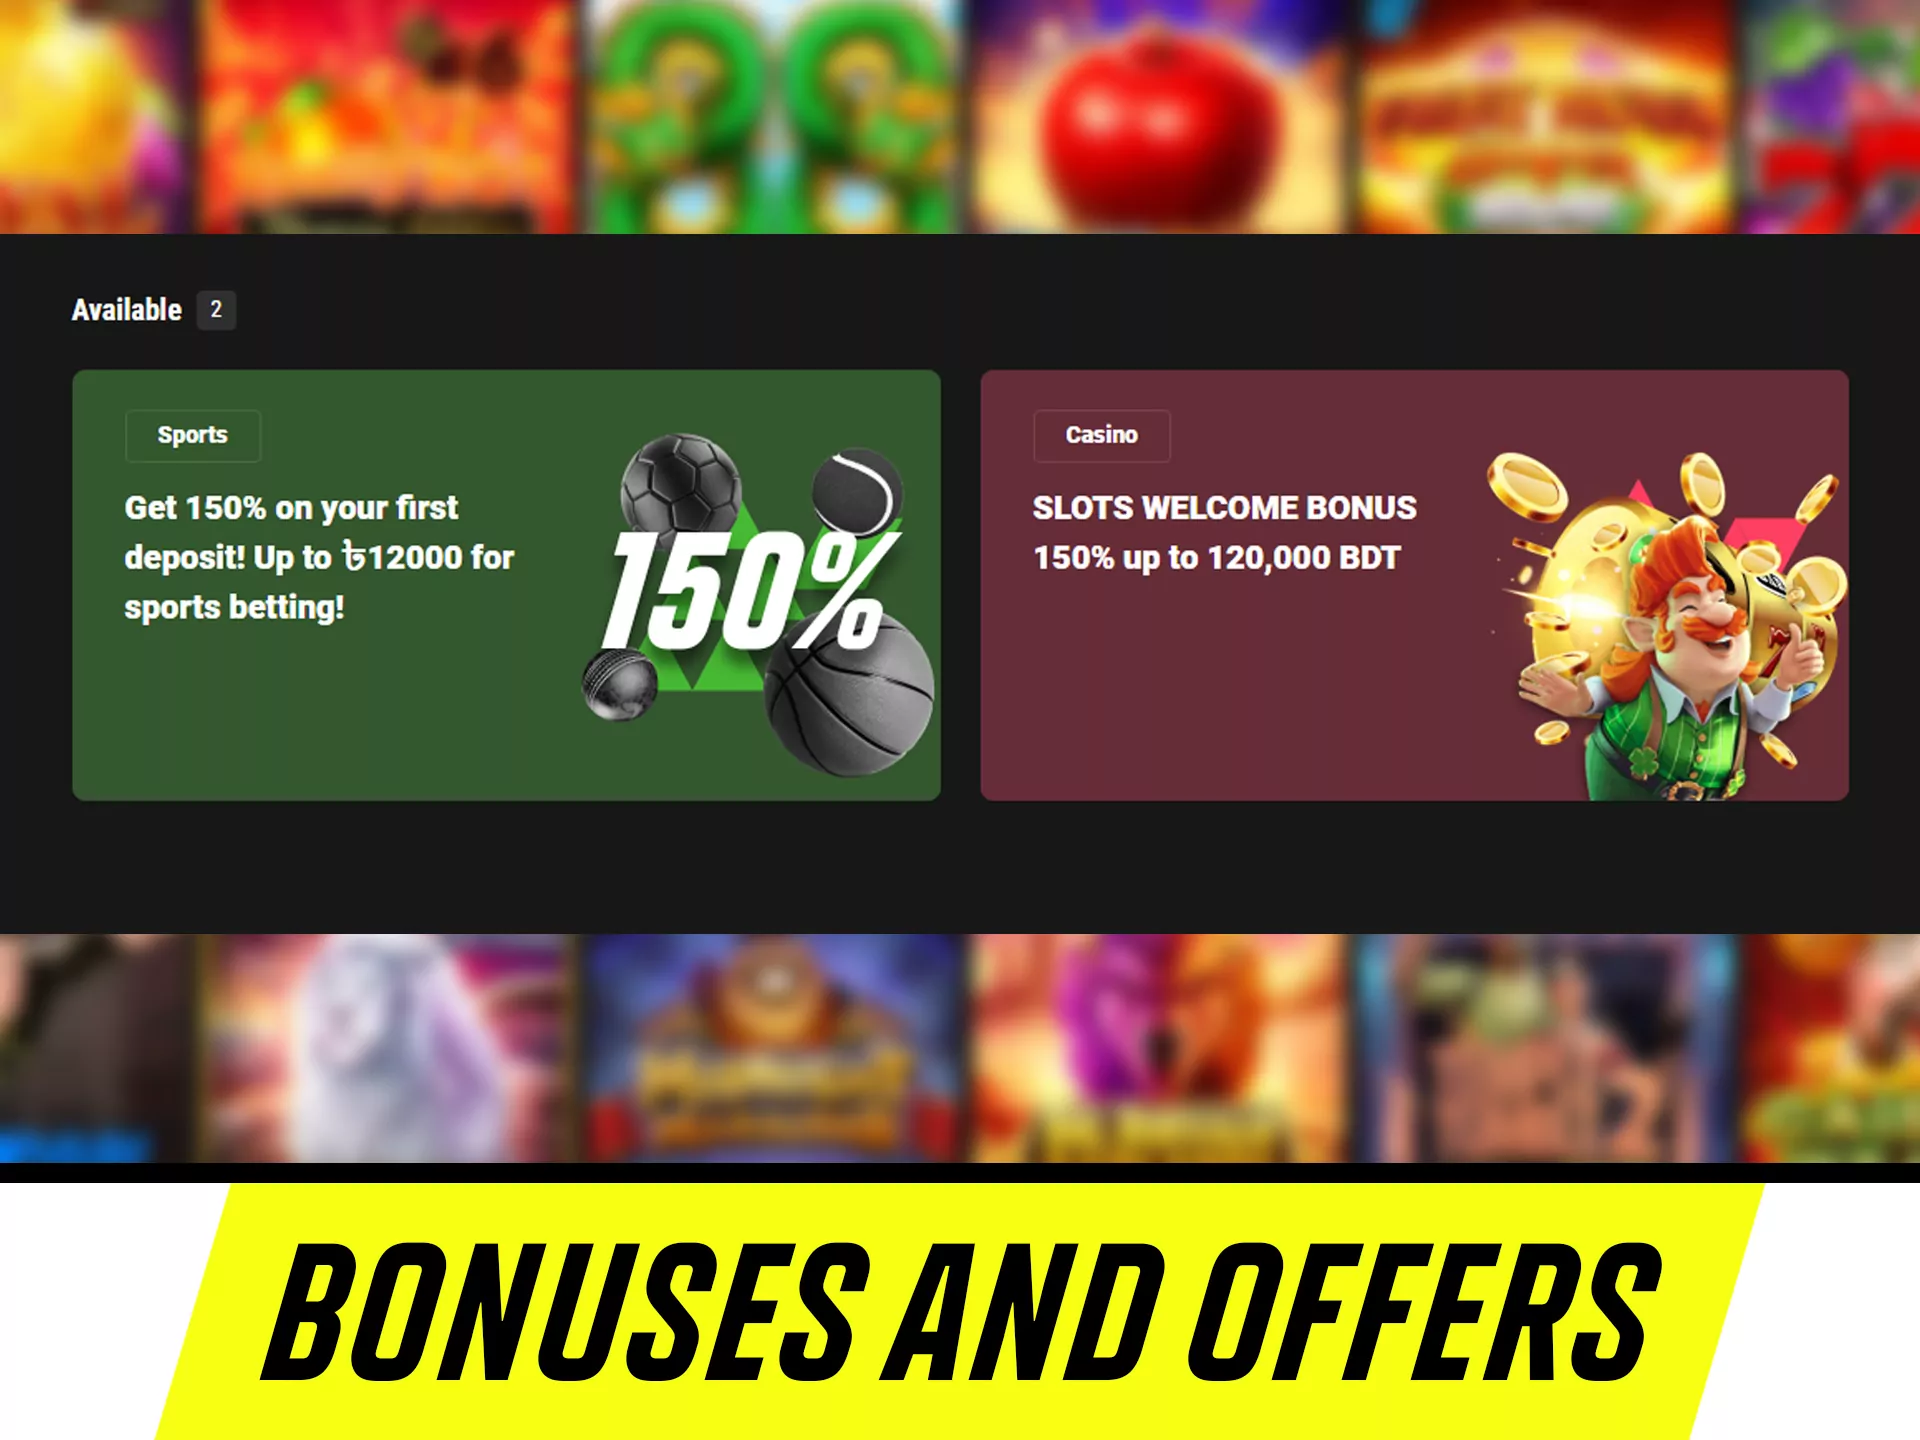 Use all of the bonuses at Parimatch.